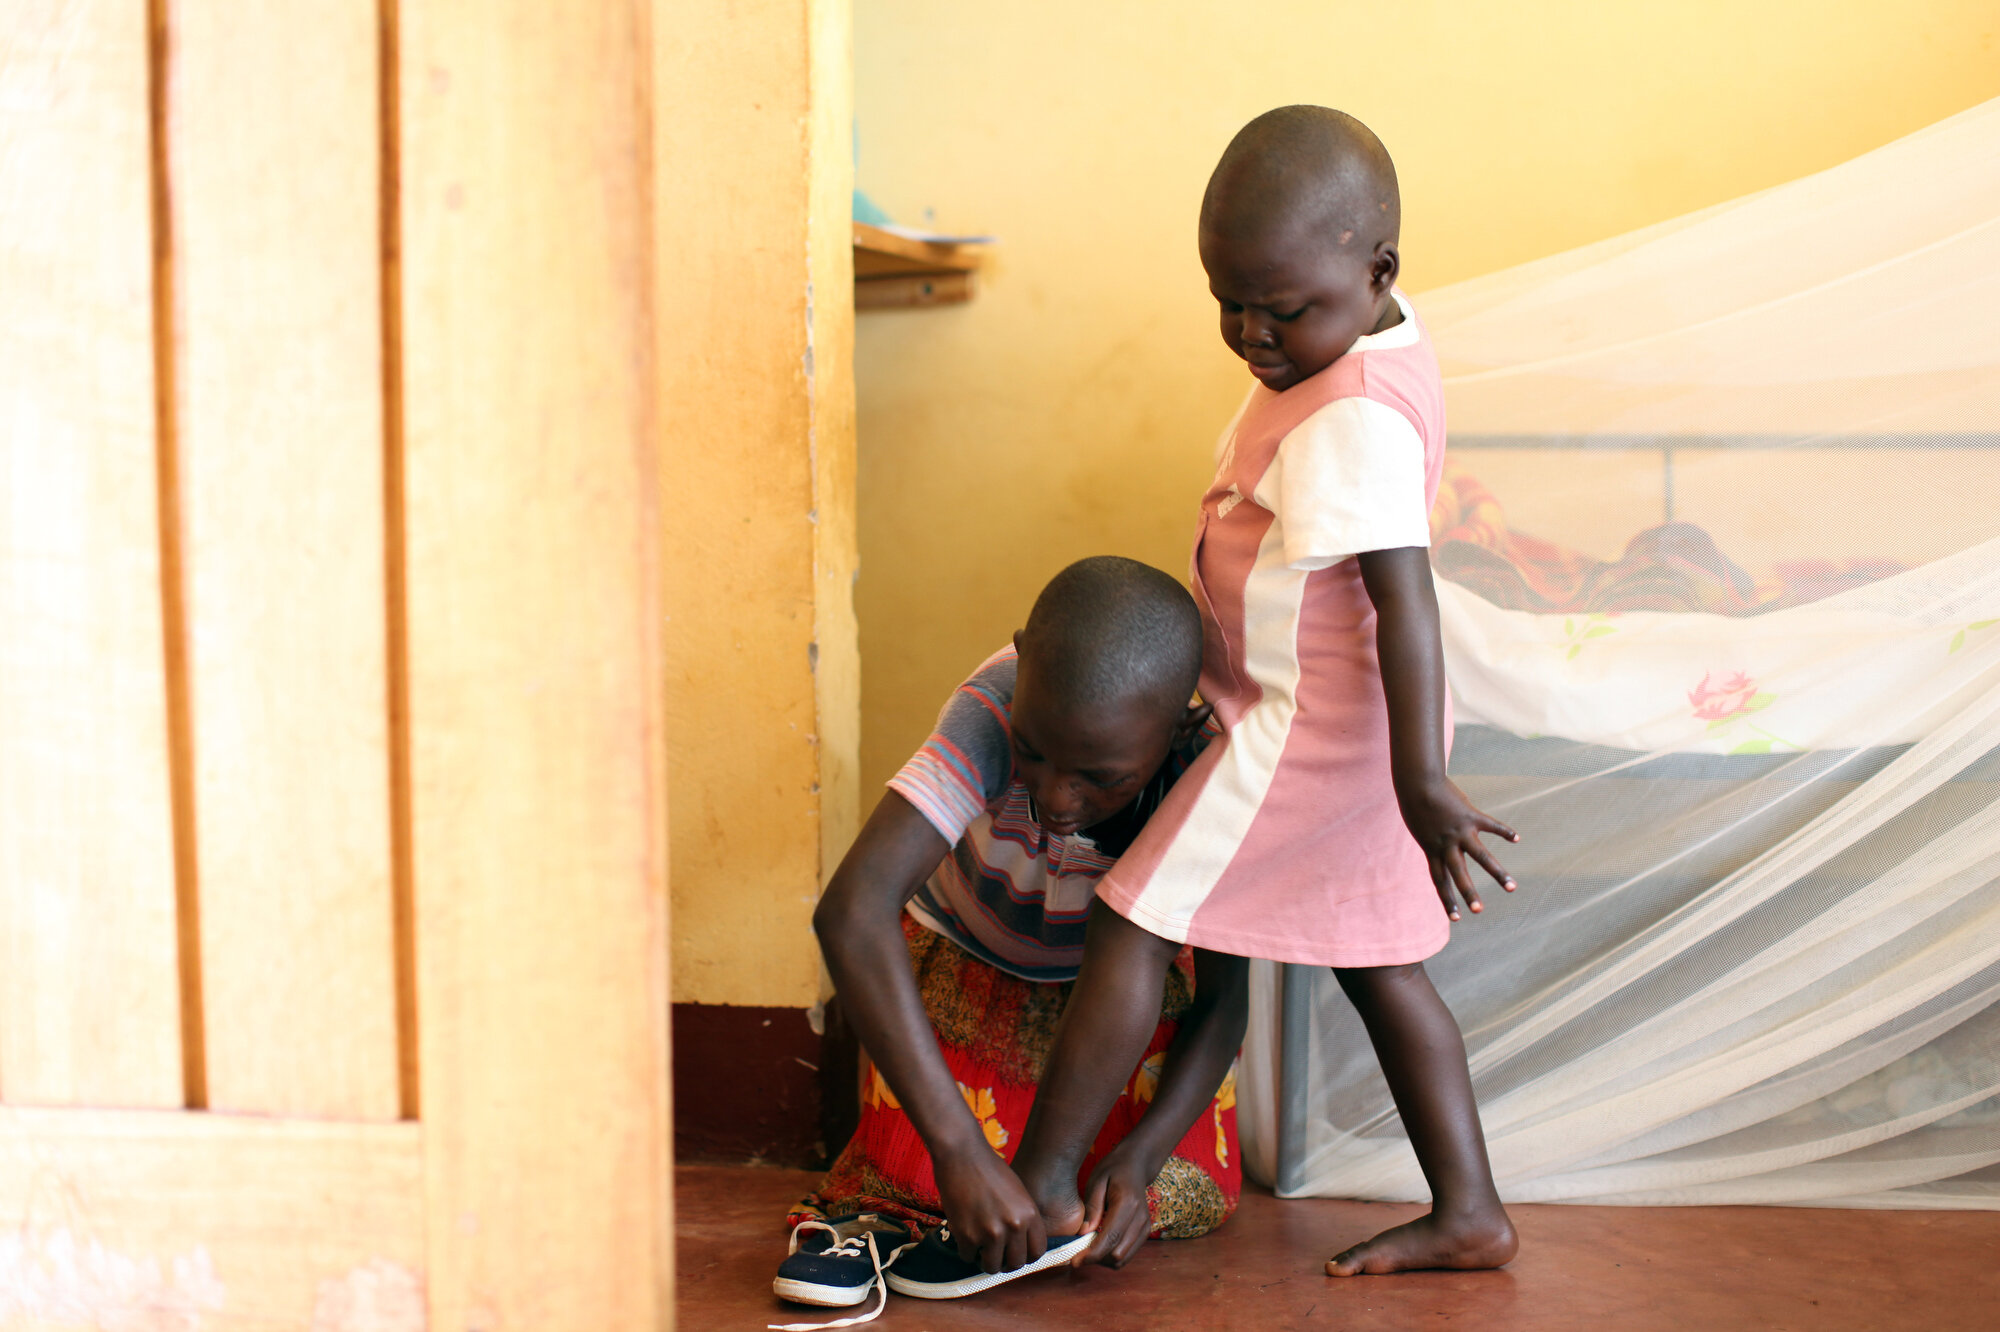  Helen helps Desire put on her shoes at Omoana House, a residential rehabilitation center for malnourished children in Njeru, Uganda. The older kids pitch in with caring for the younger kids, often treating them like siblings. Once the children are r